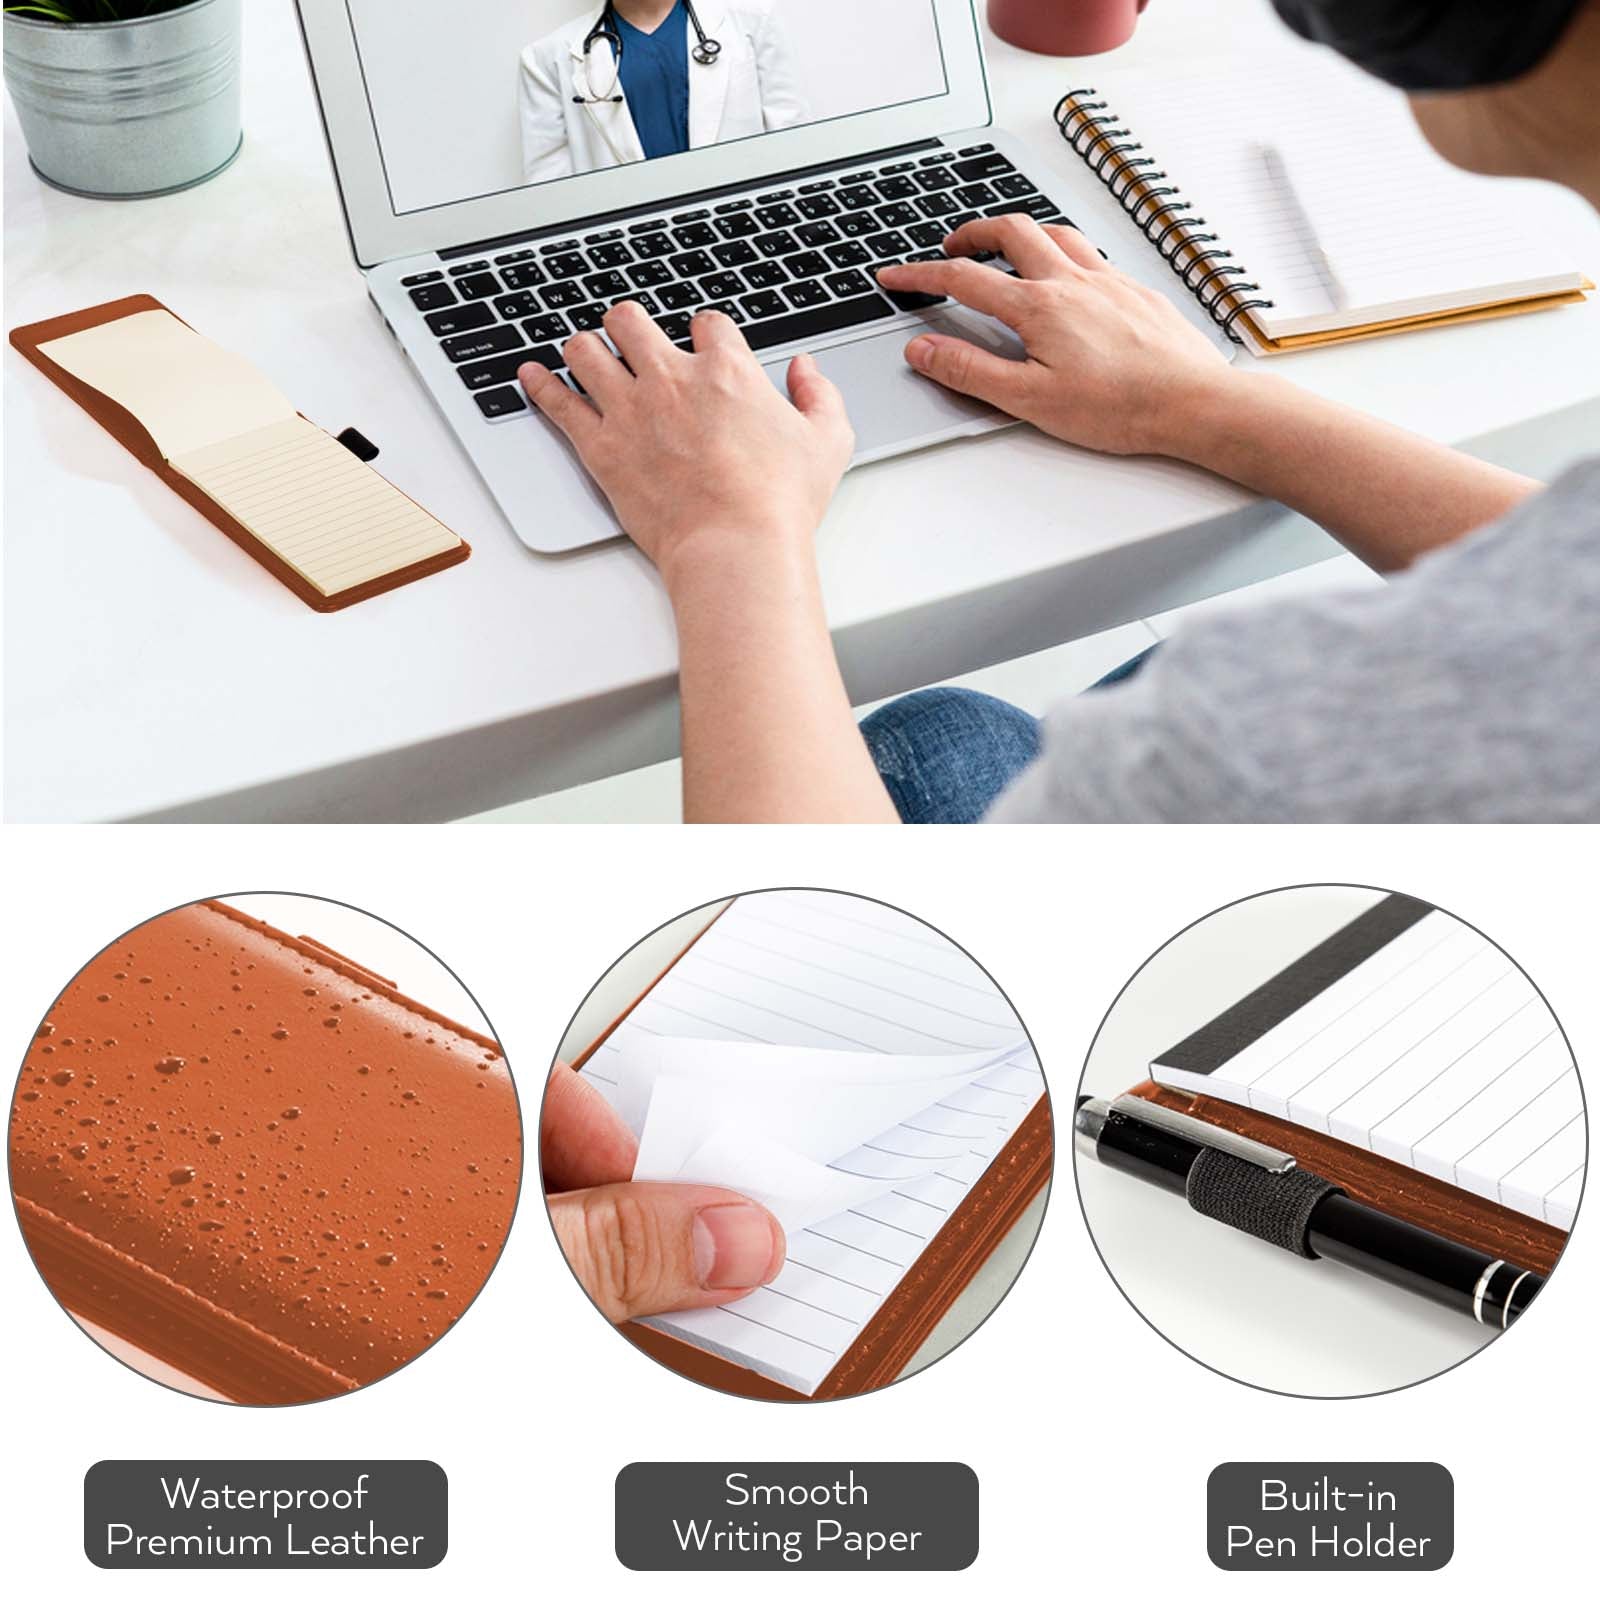 Nicpro Small Notepads Holder Set, 10 Pieces Mini Pocket Notebook PU Leather with 1pcs Metal Pen and 8pcs Lined Memo Book Refills for Meeting, Daily Records, Notes (Brown)